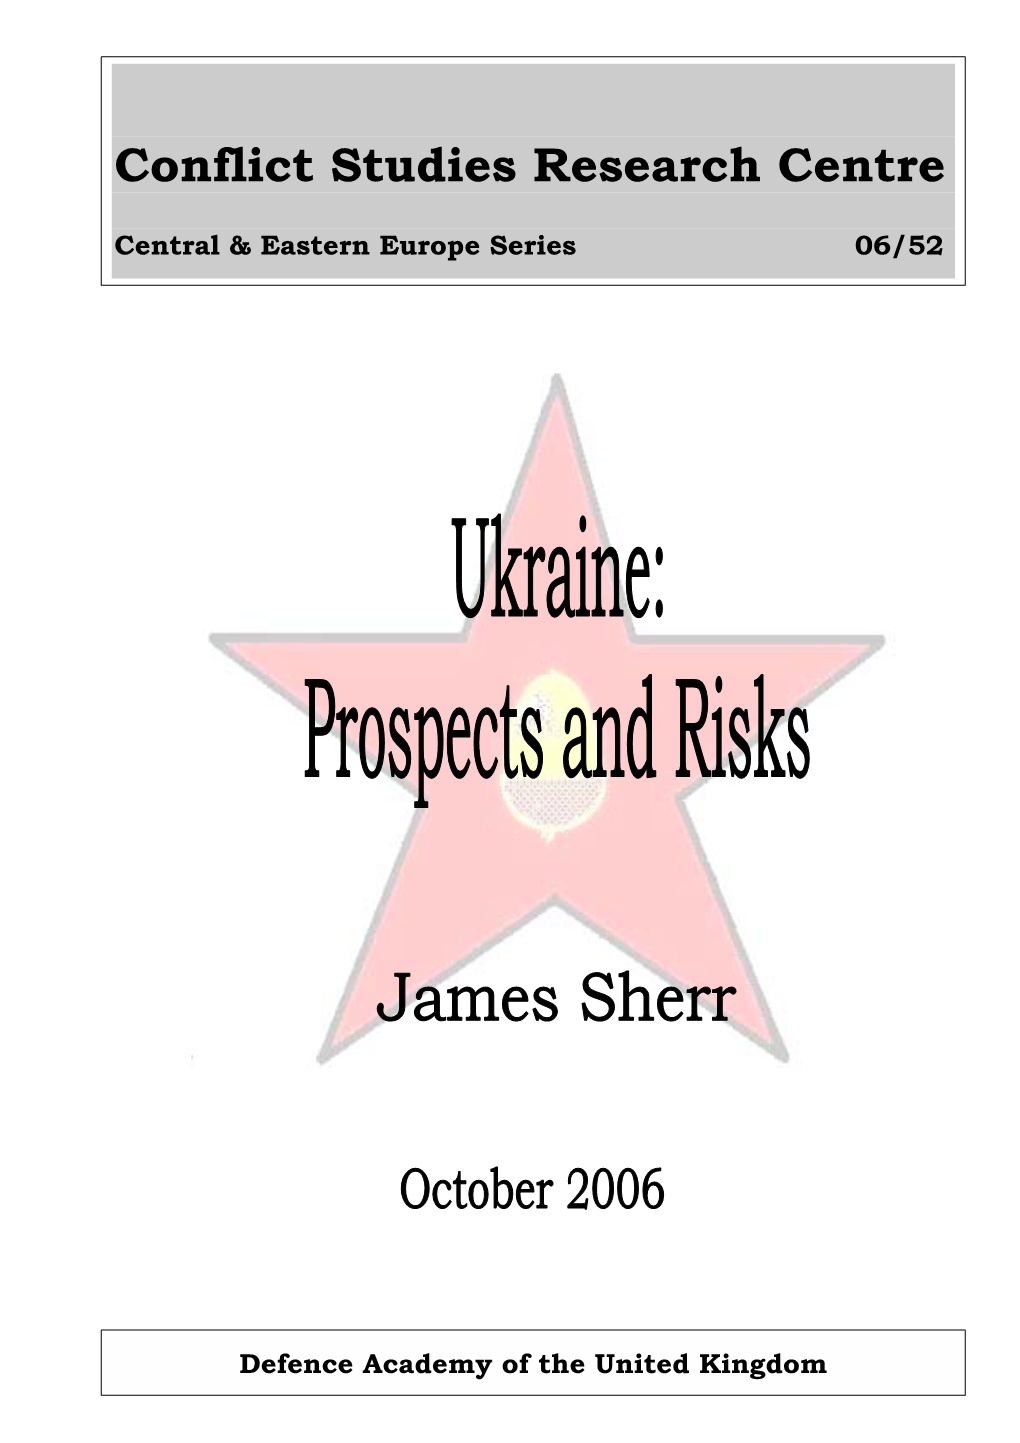 Ukraine: Prospects and Risks